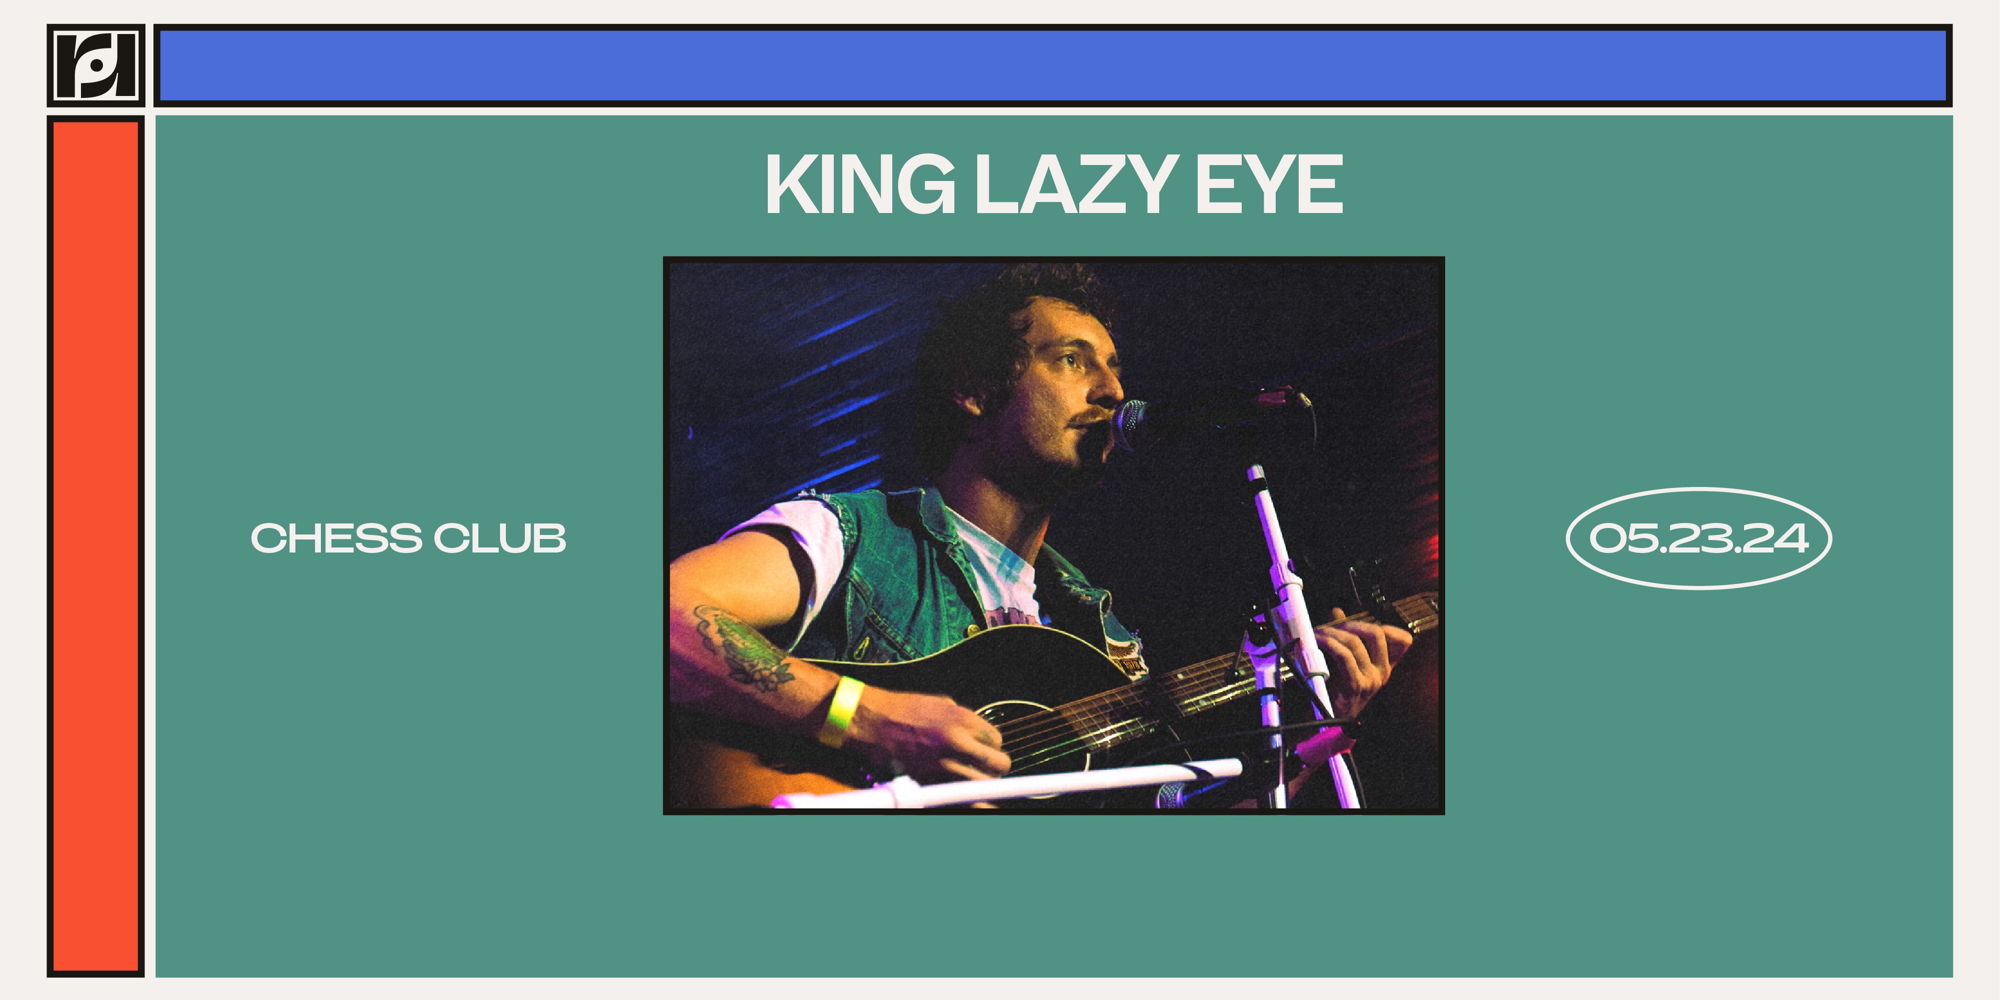 Resound Presents: King Lazy Eye at Chess Club 5/23 promotional image